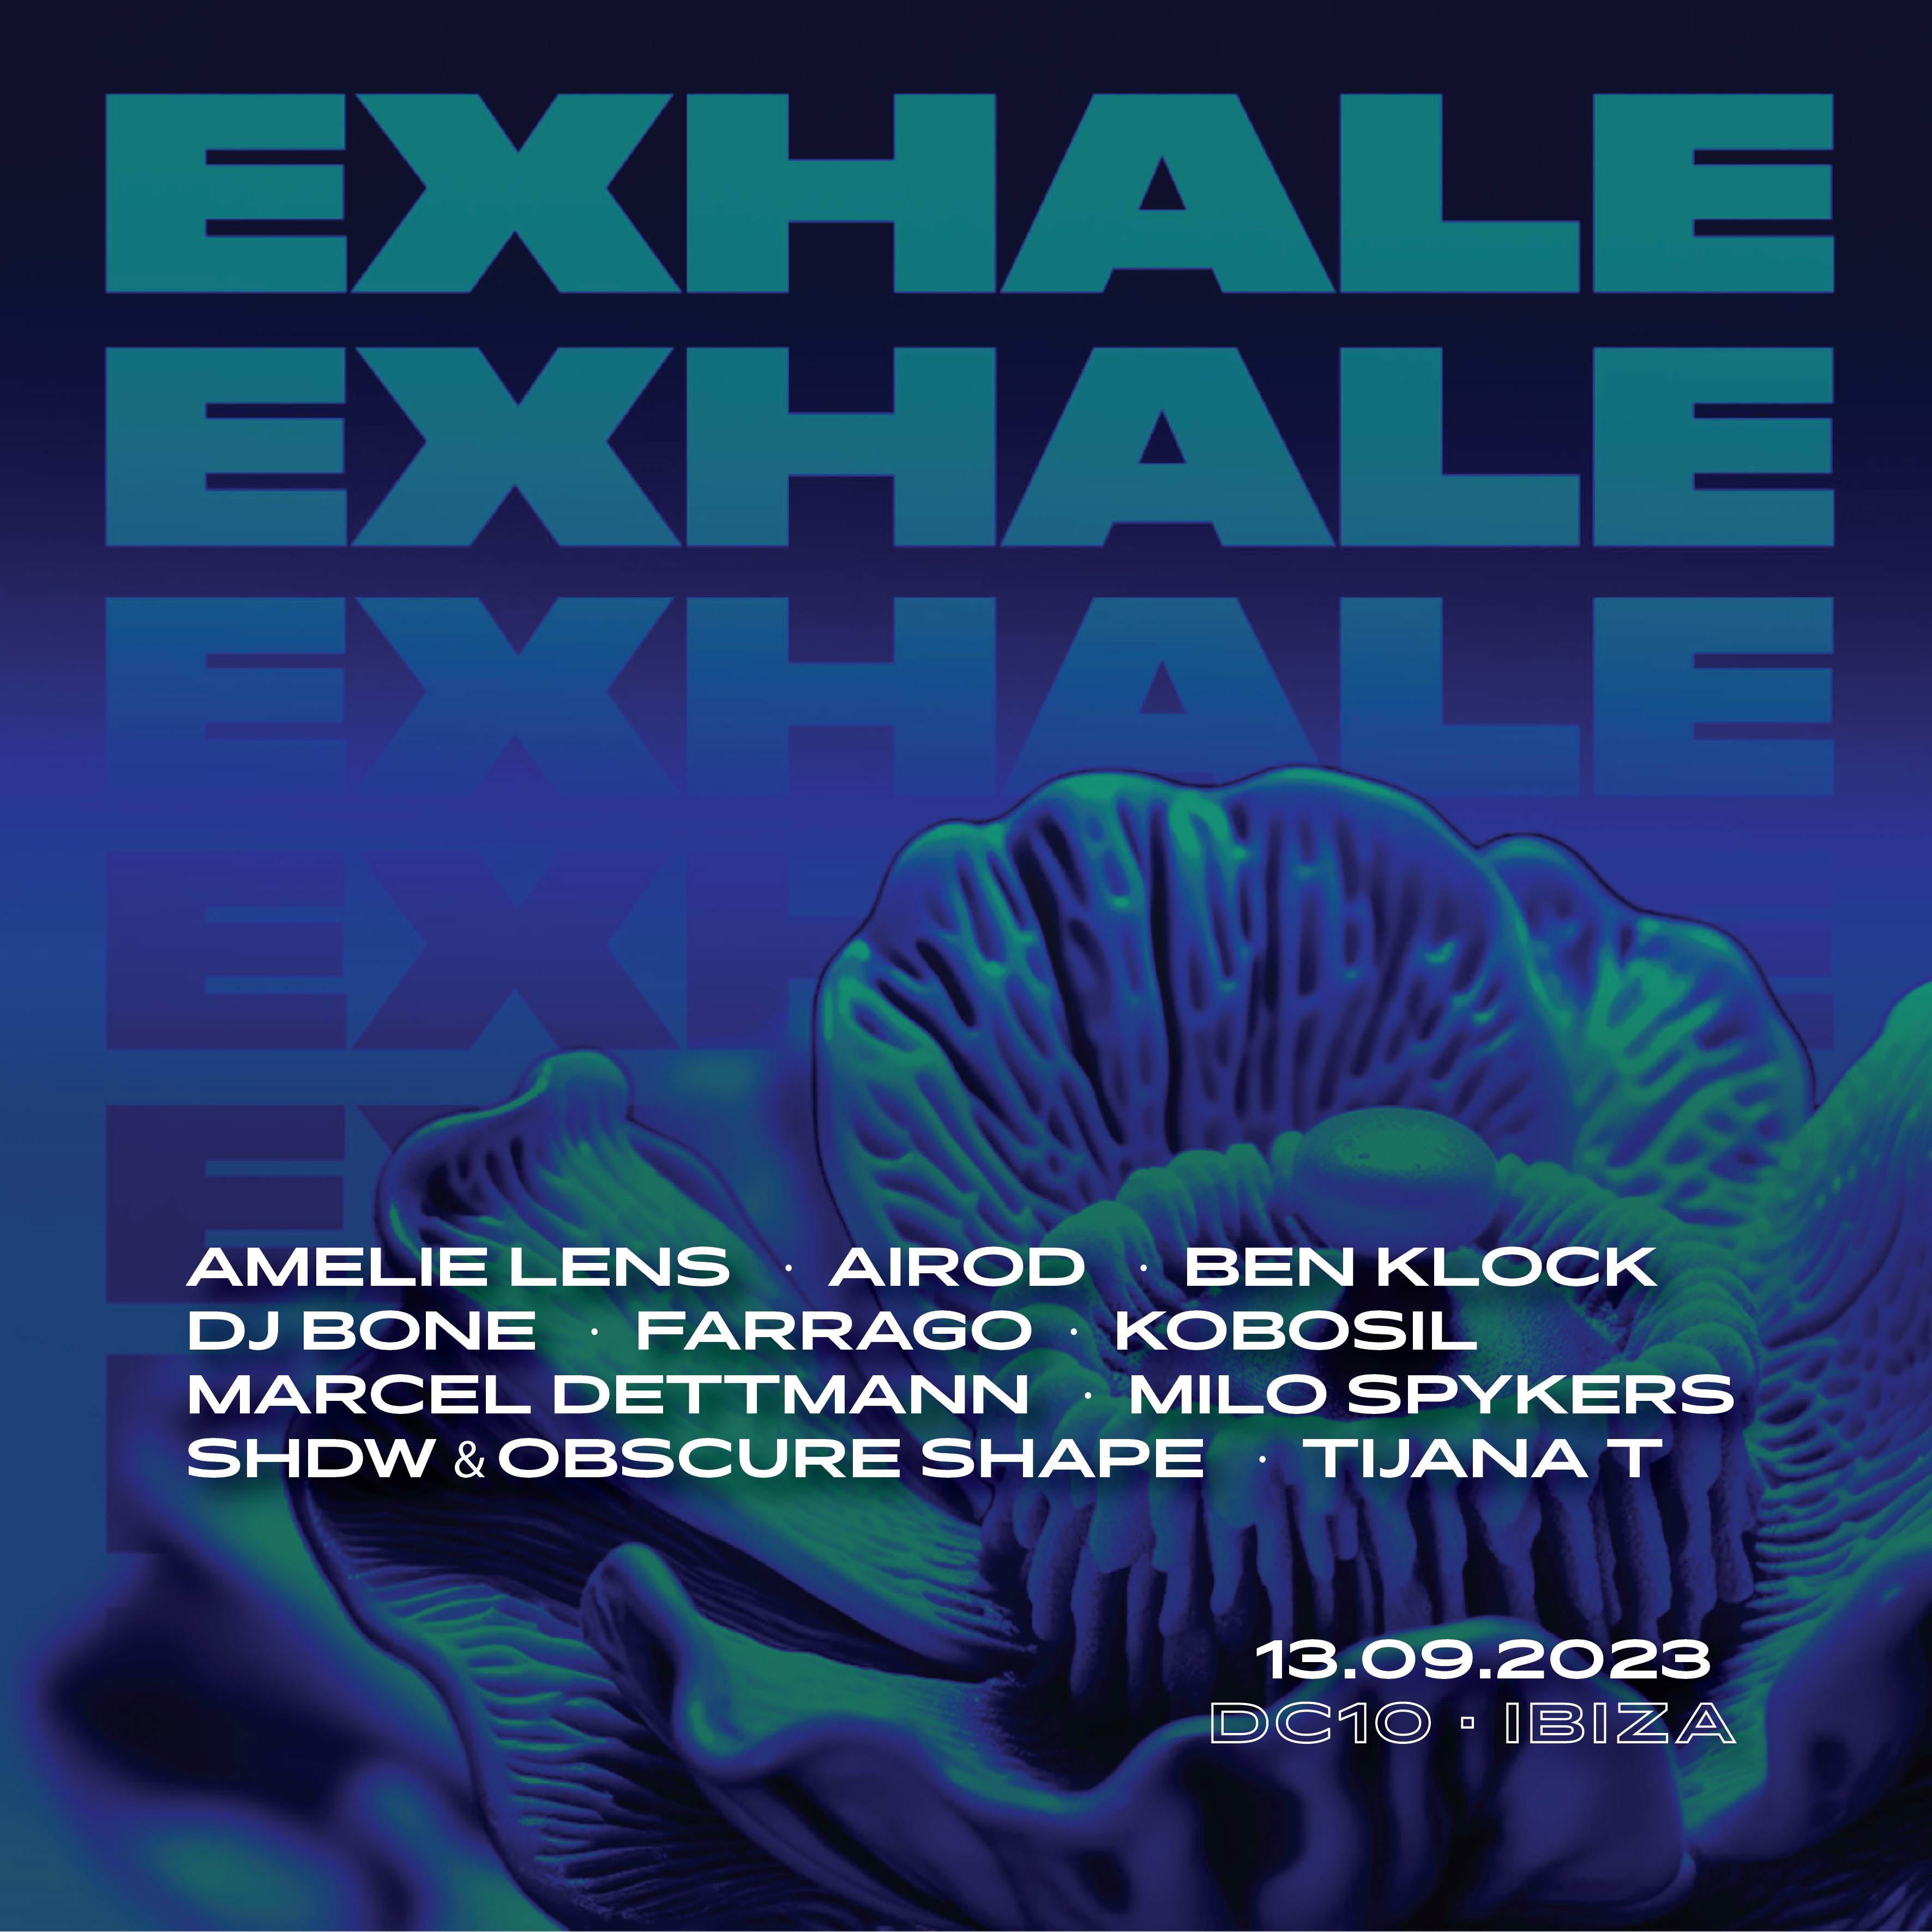 EXHALE x DC-10 WK 8 with Amelie Lens, Airod, Ben Klock, DJ Bone and more - フライヤー表